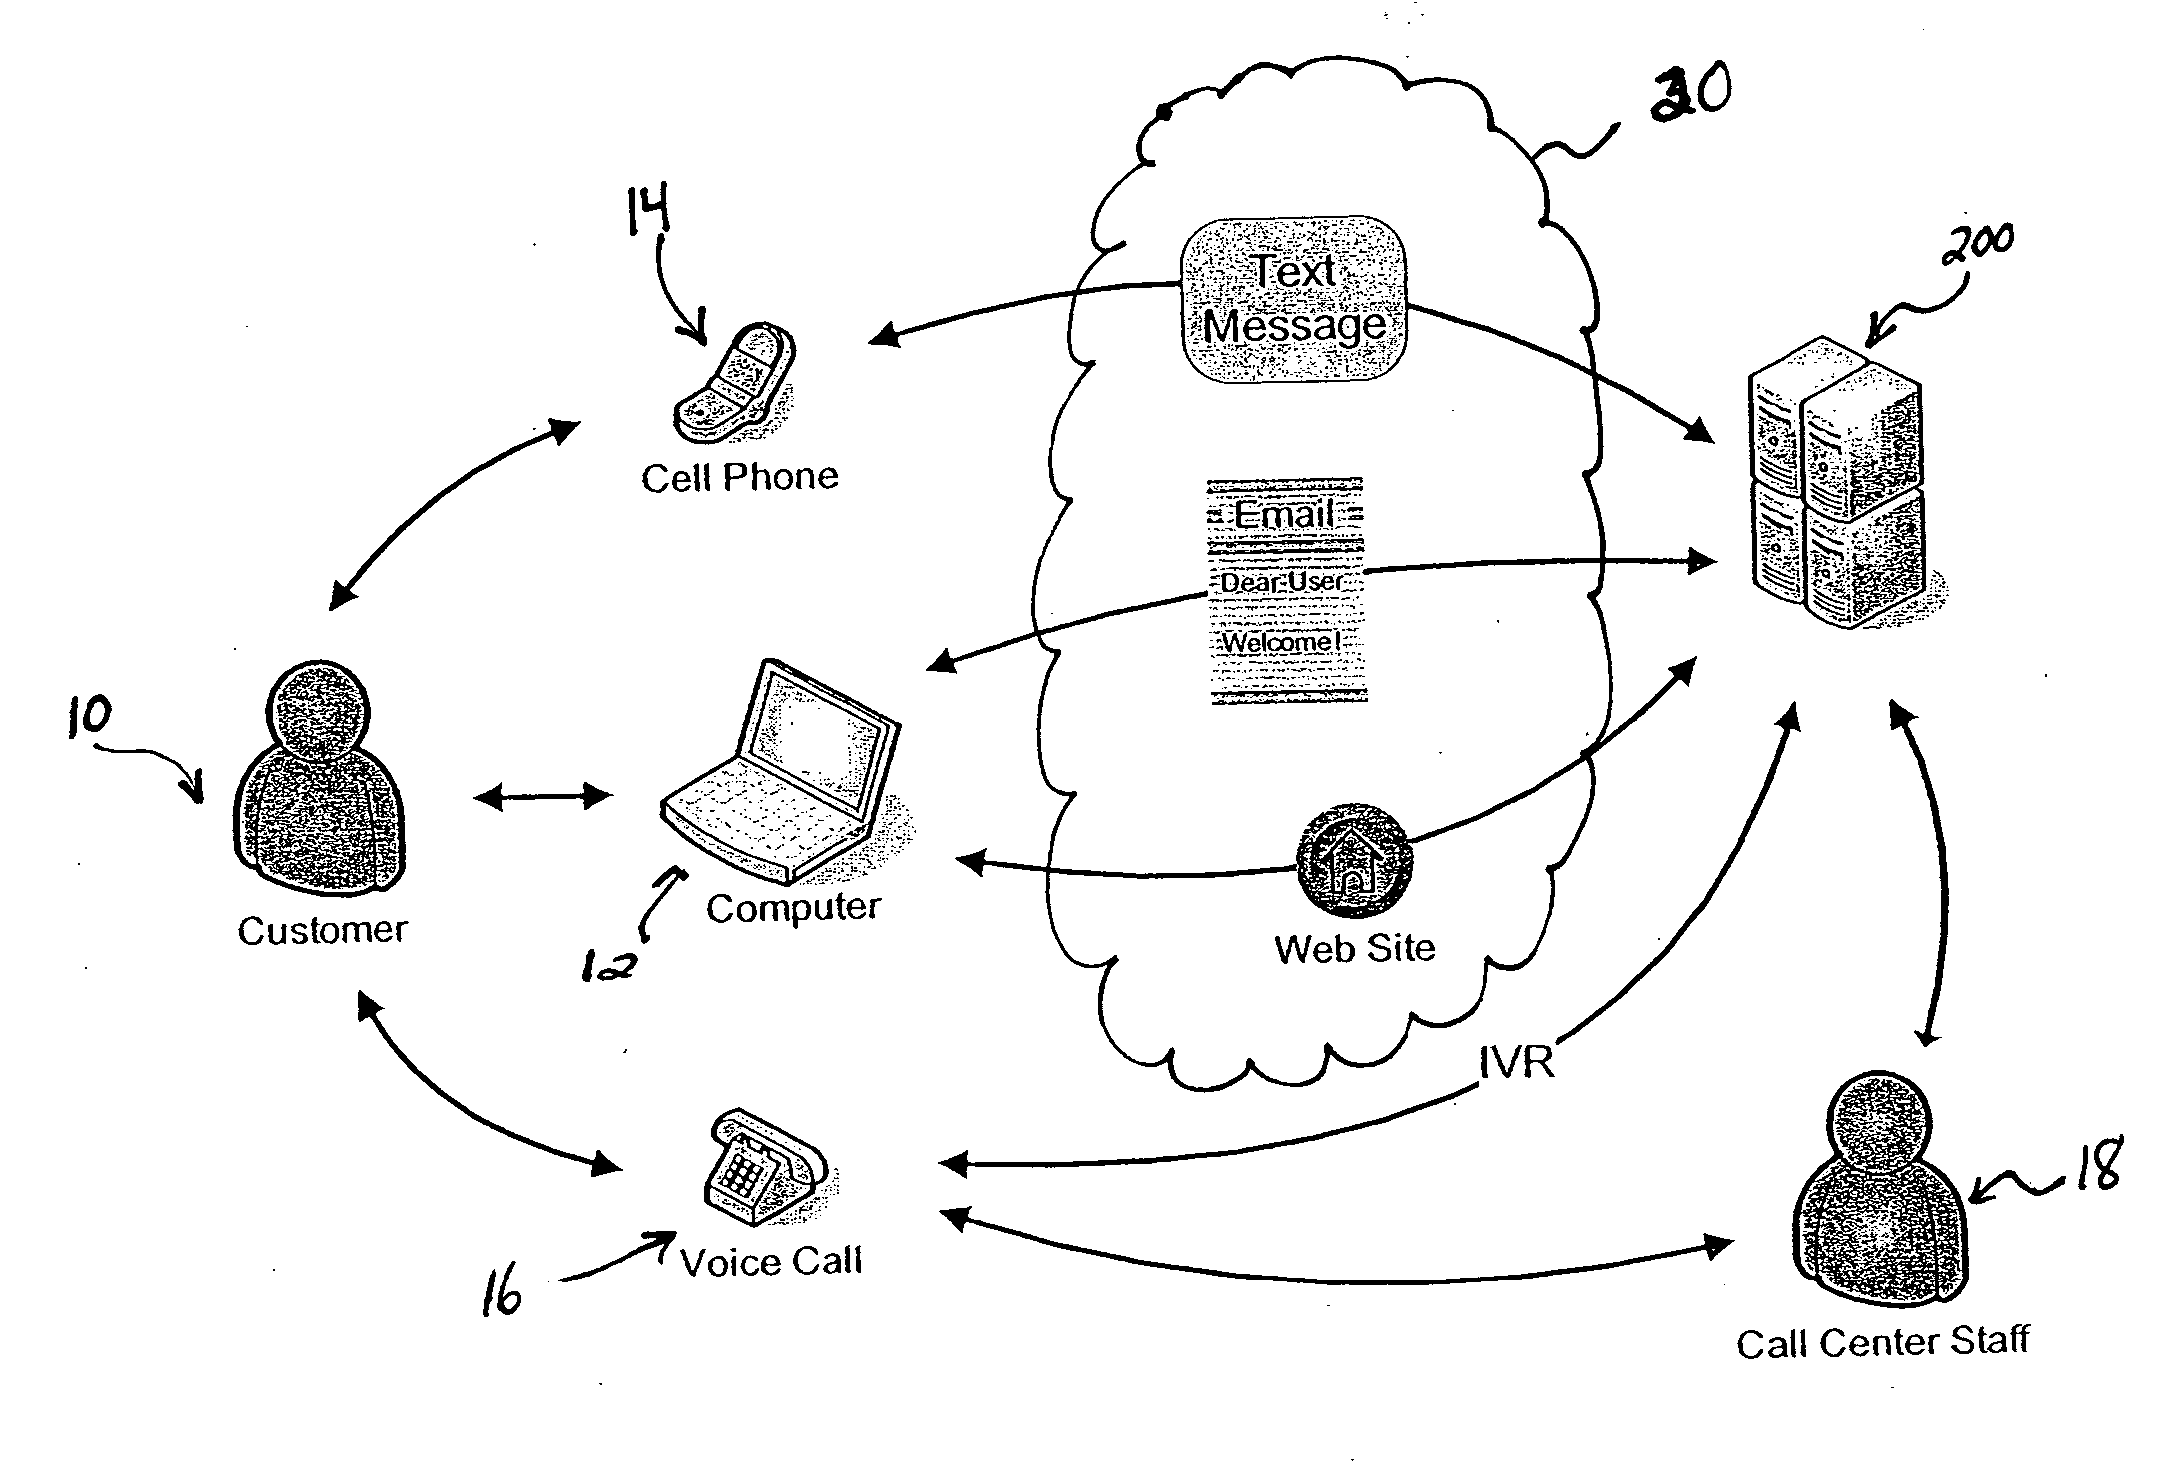 System and method for providing customized interactive and flexible nutritional counseling